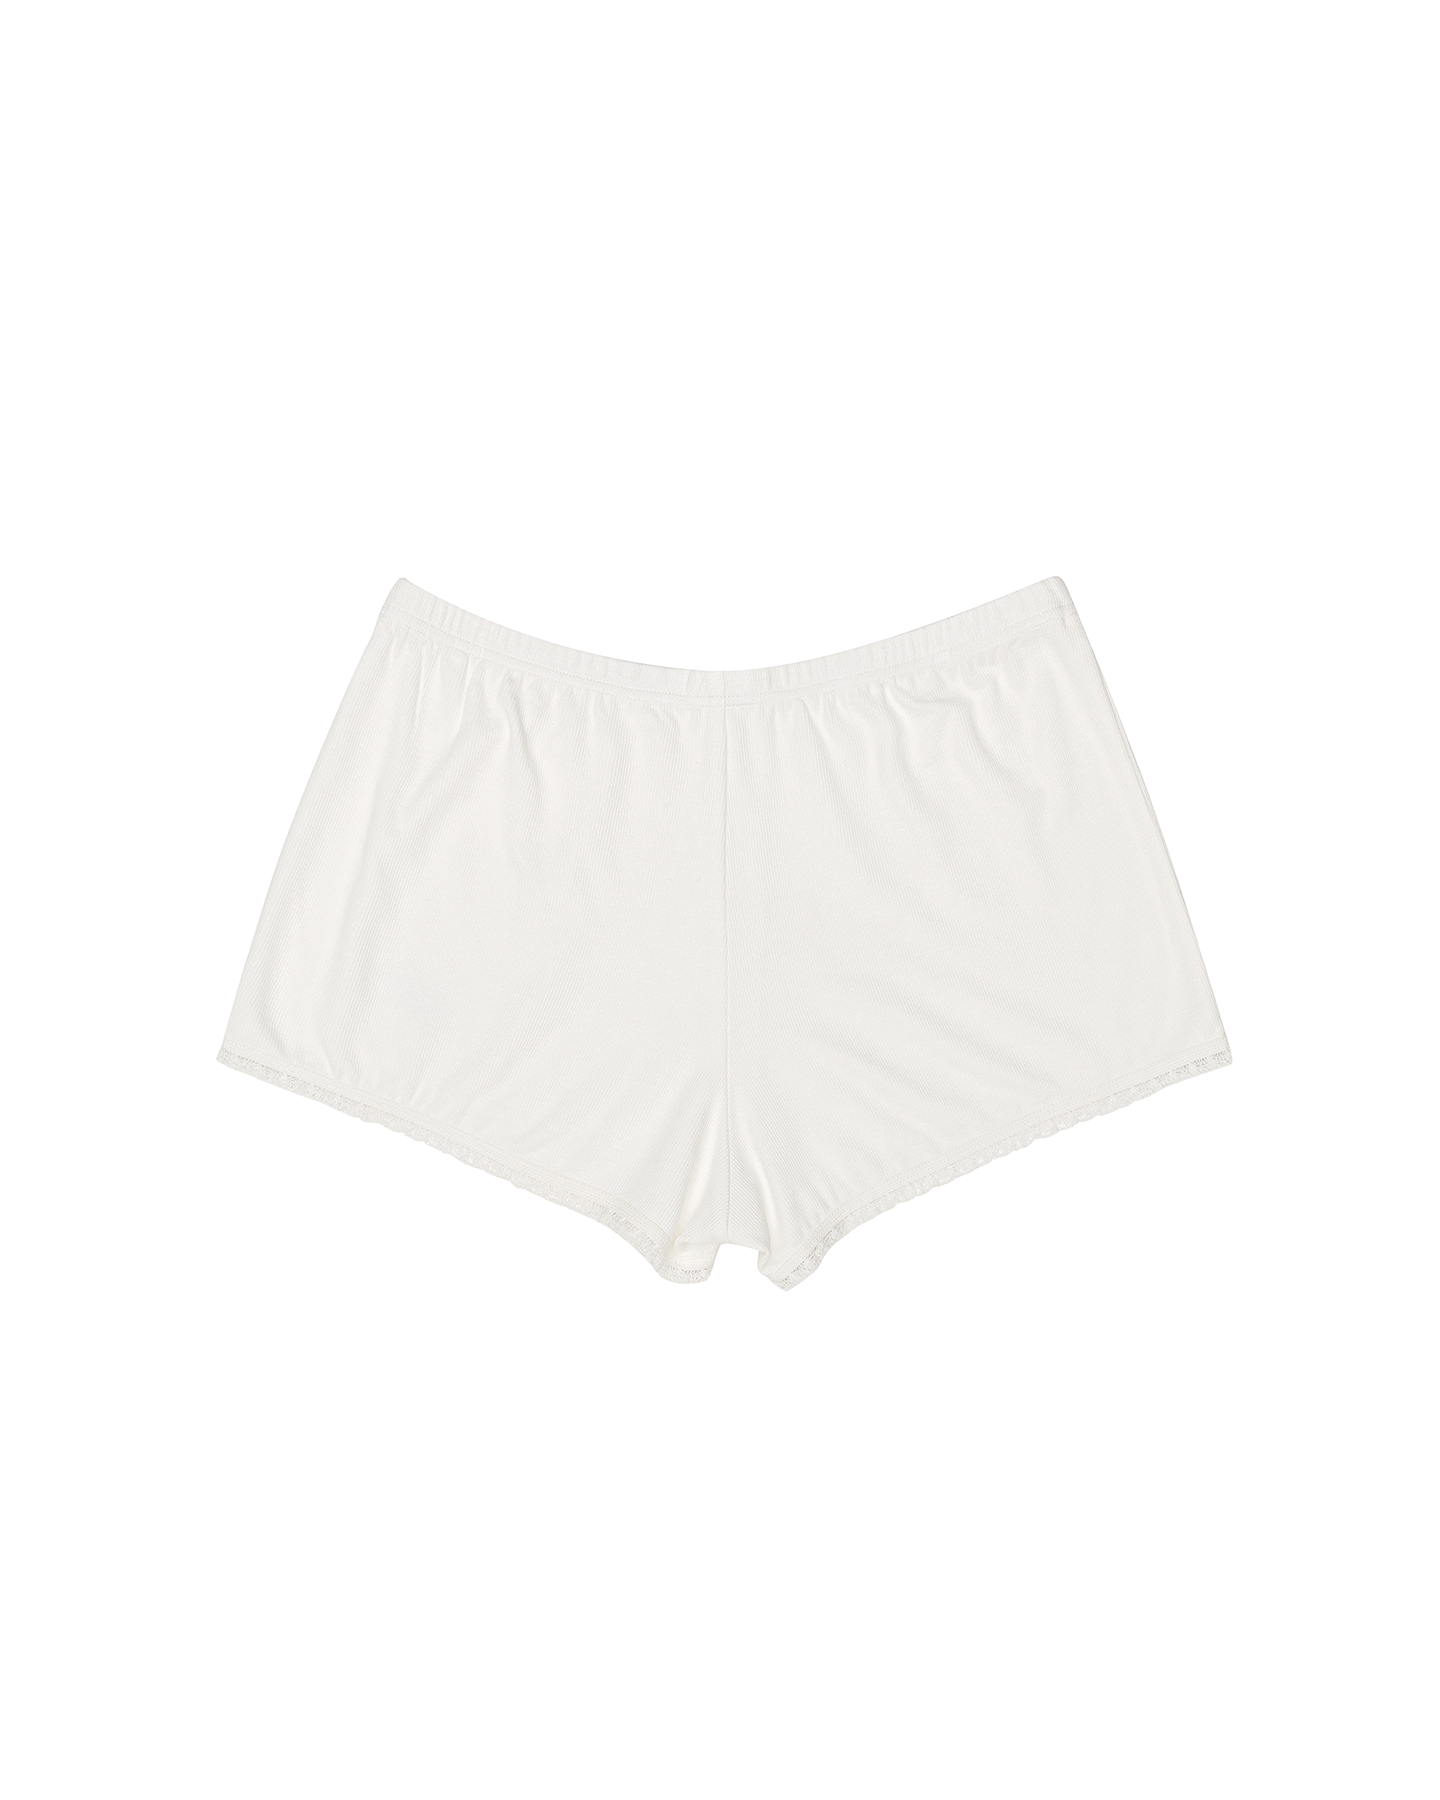 THE FAWN SLEEP SHORTS – PRIX LIMITED